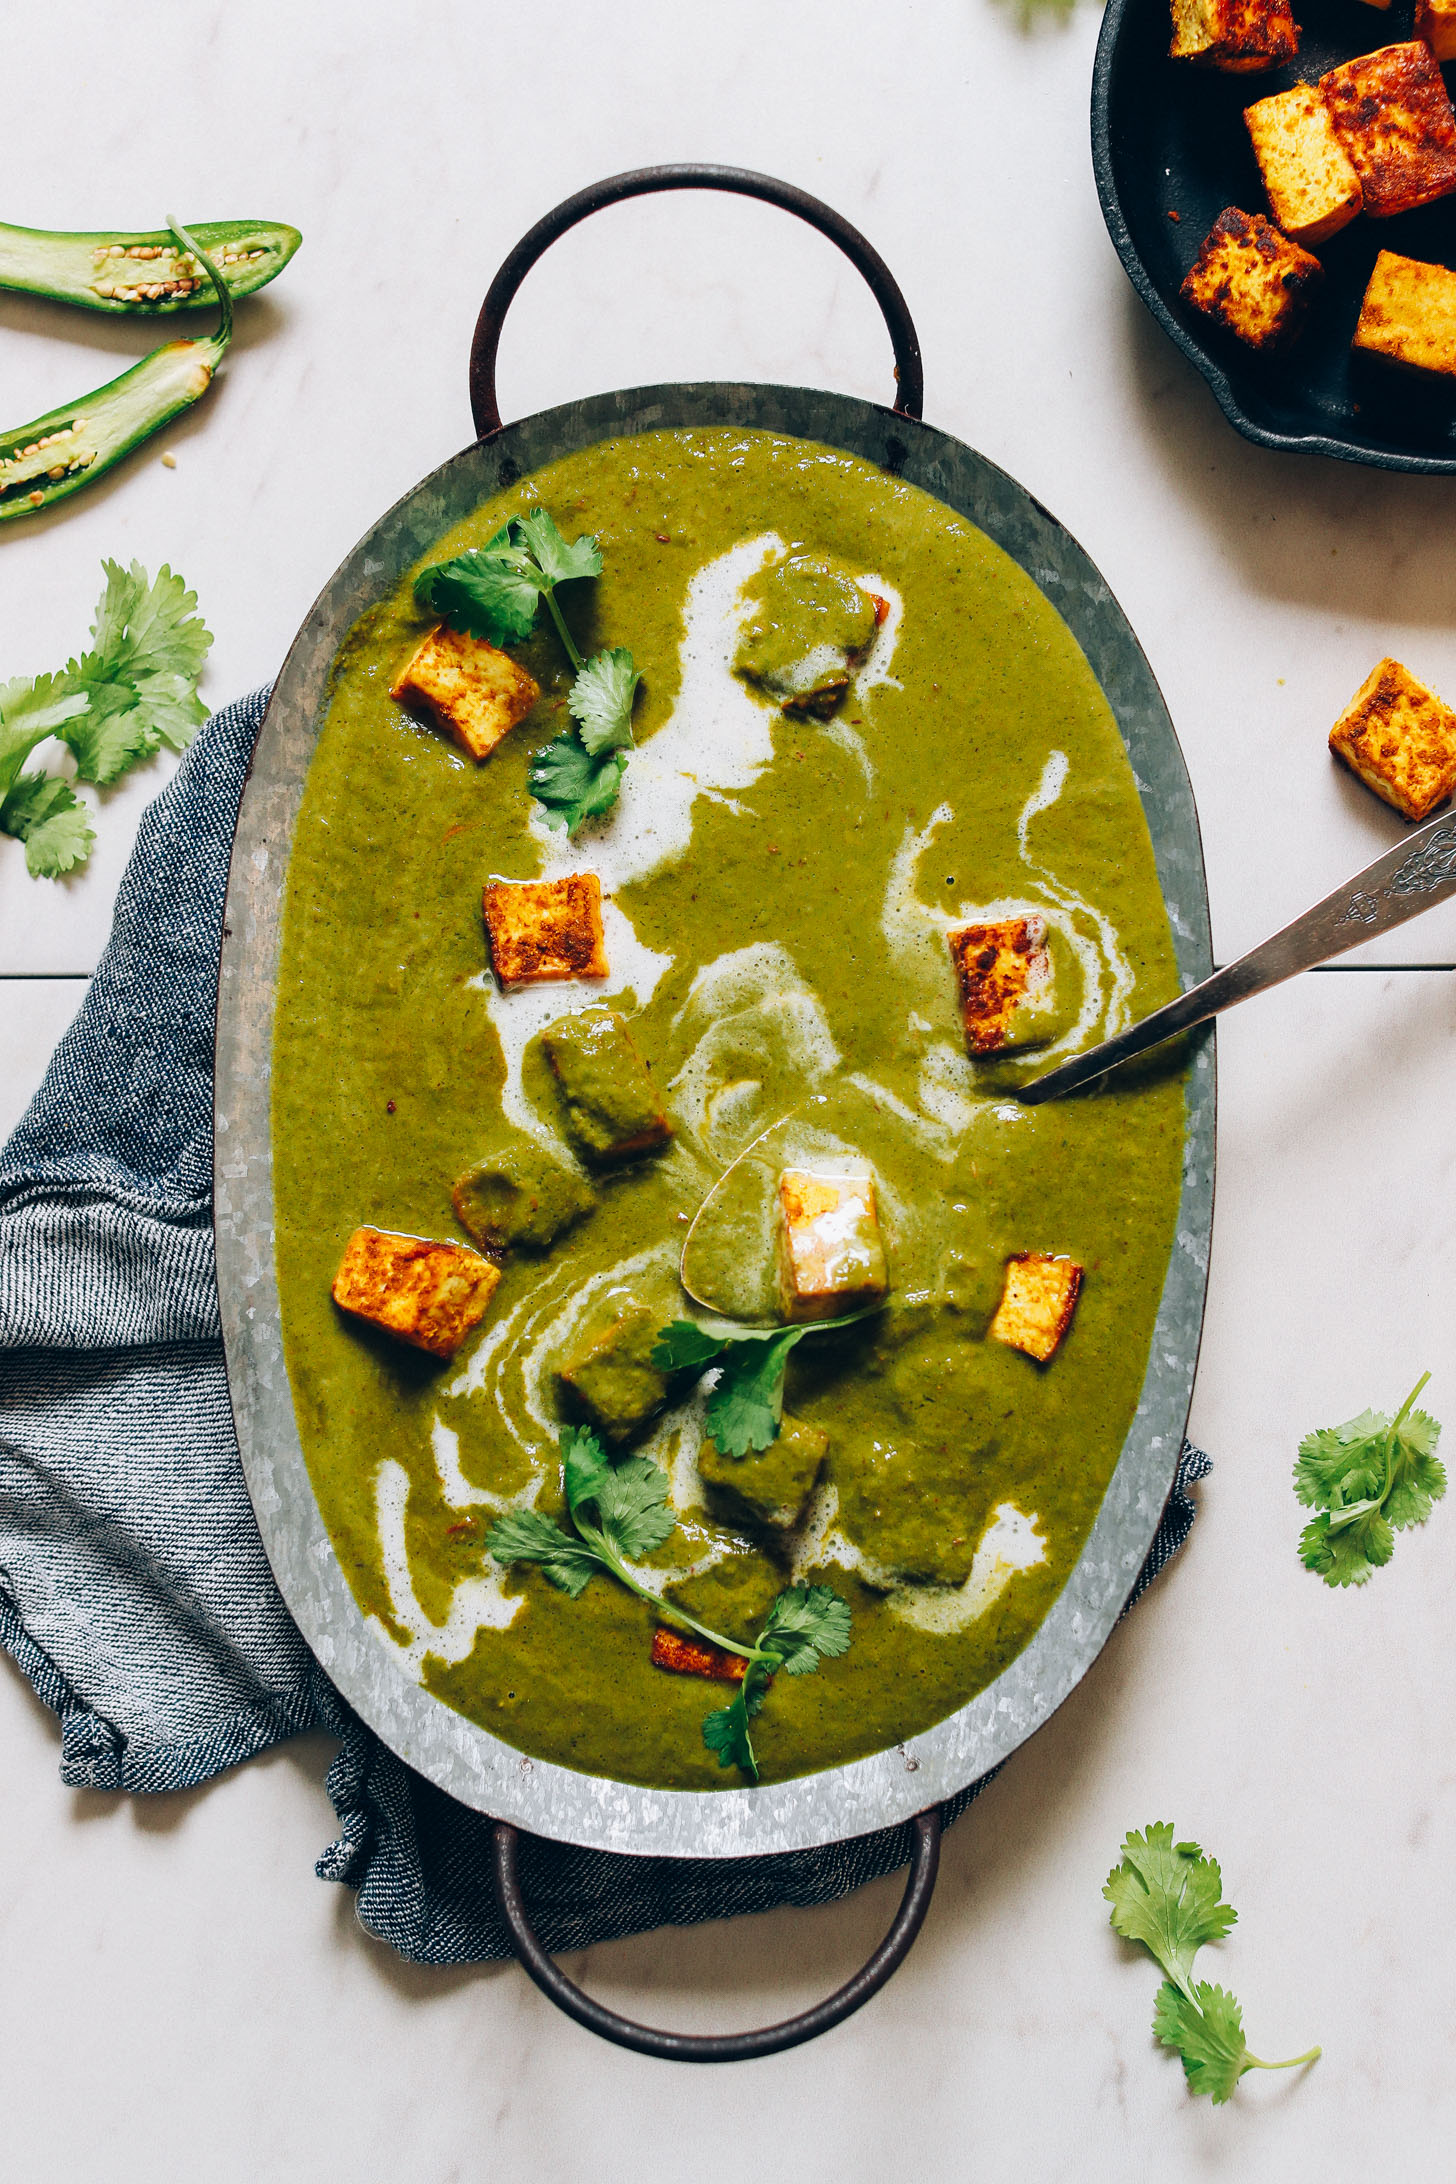 Overhead image of vegan palak paneer served in a metal tin with cubes of tofu and coconut milk garnish